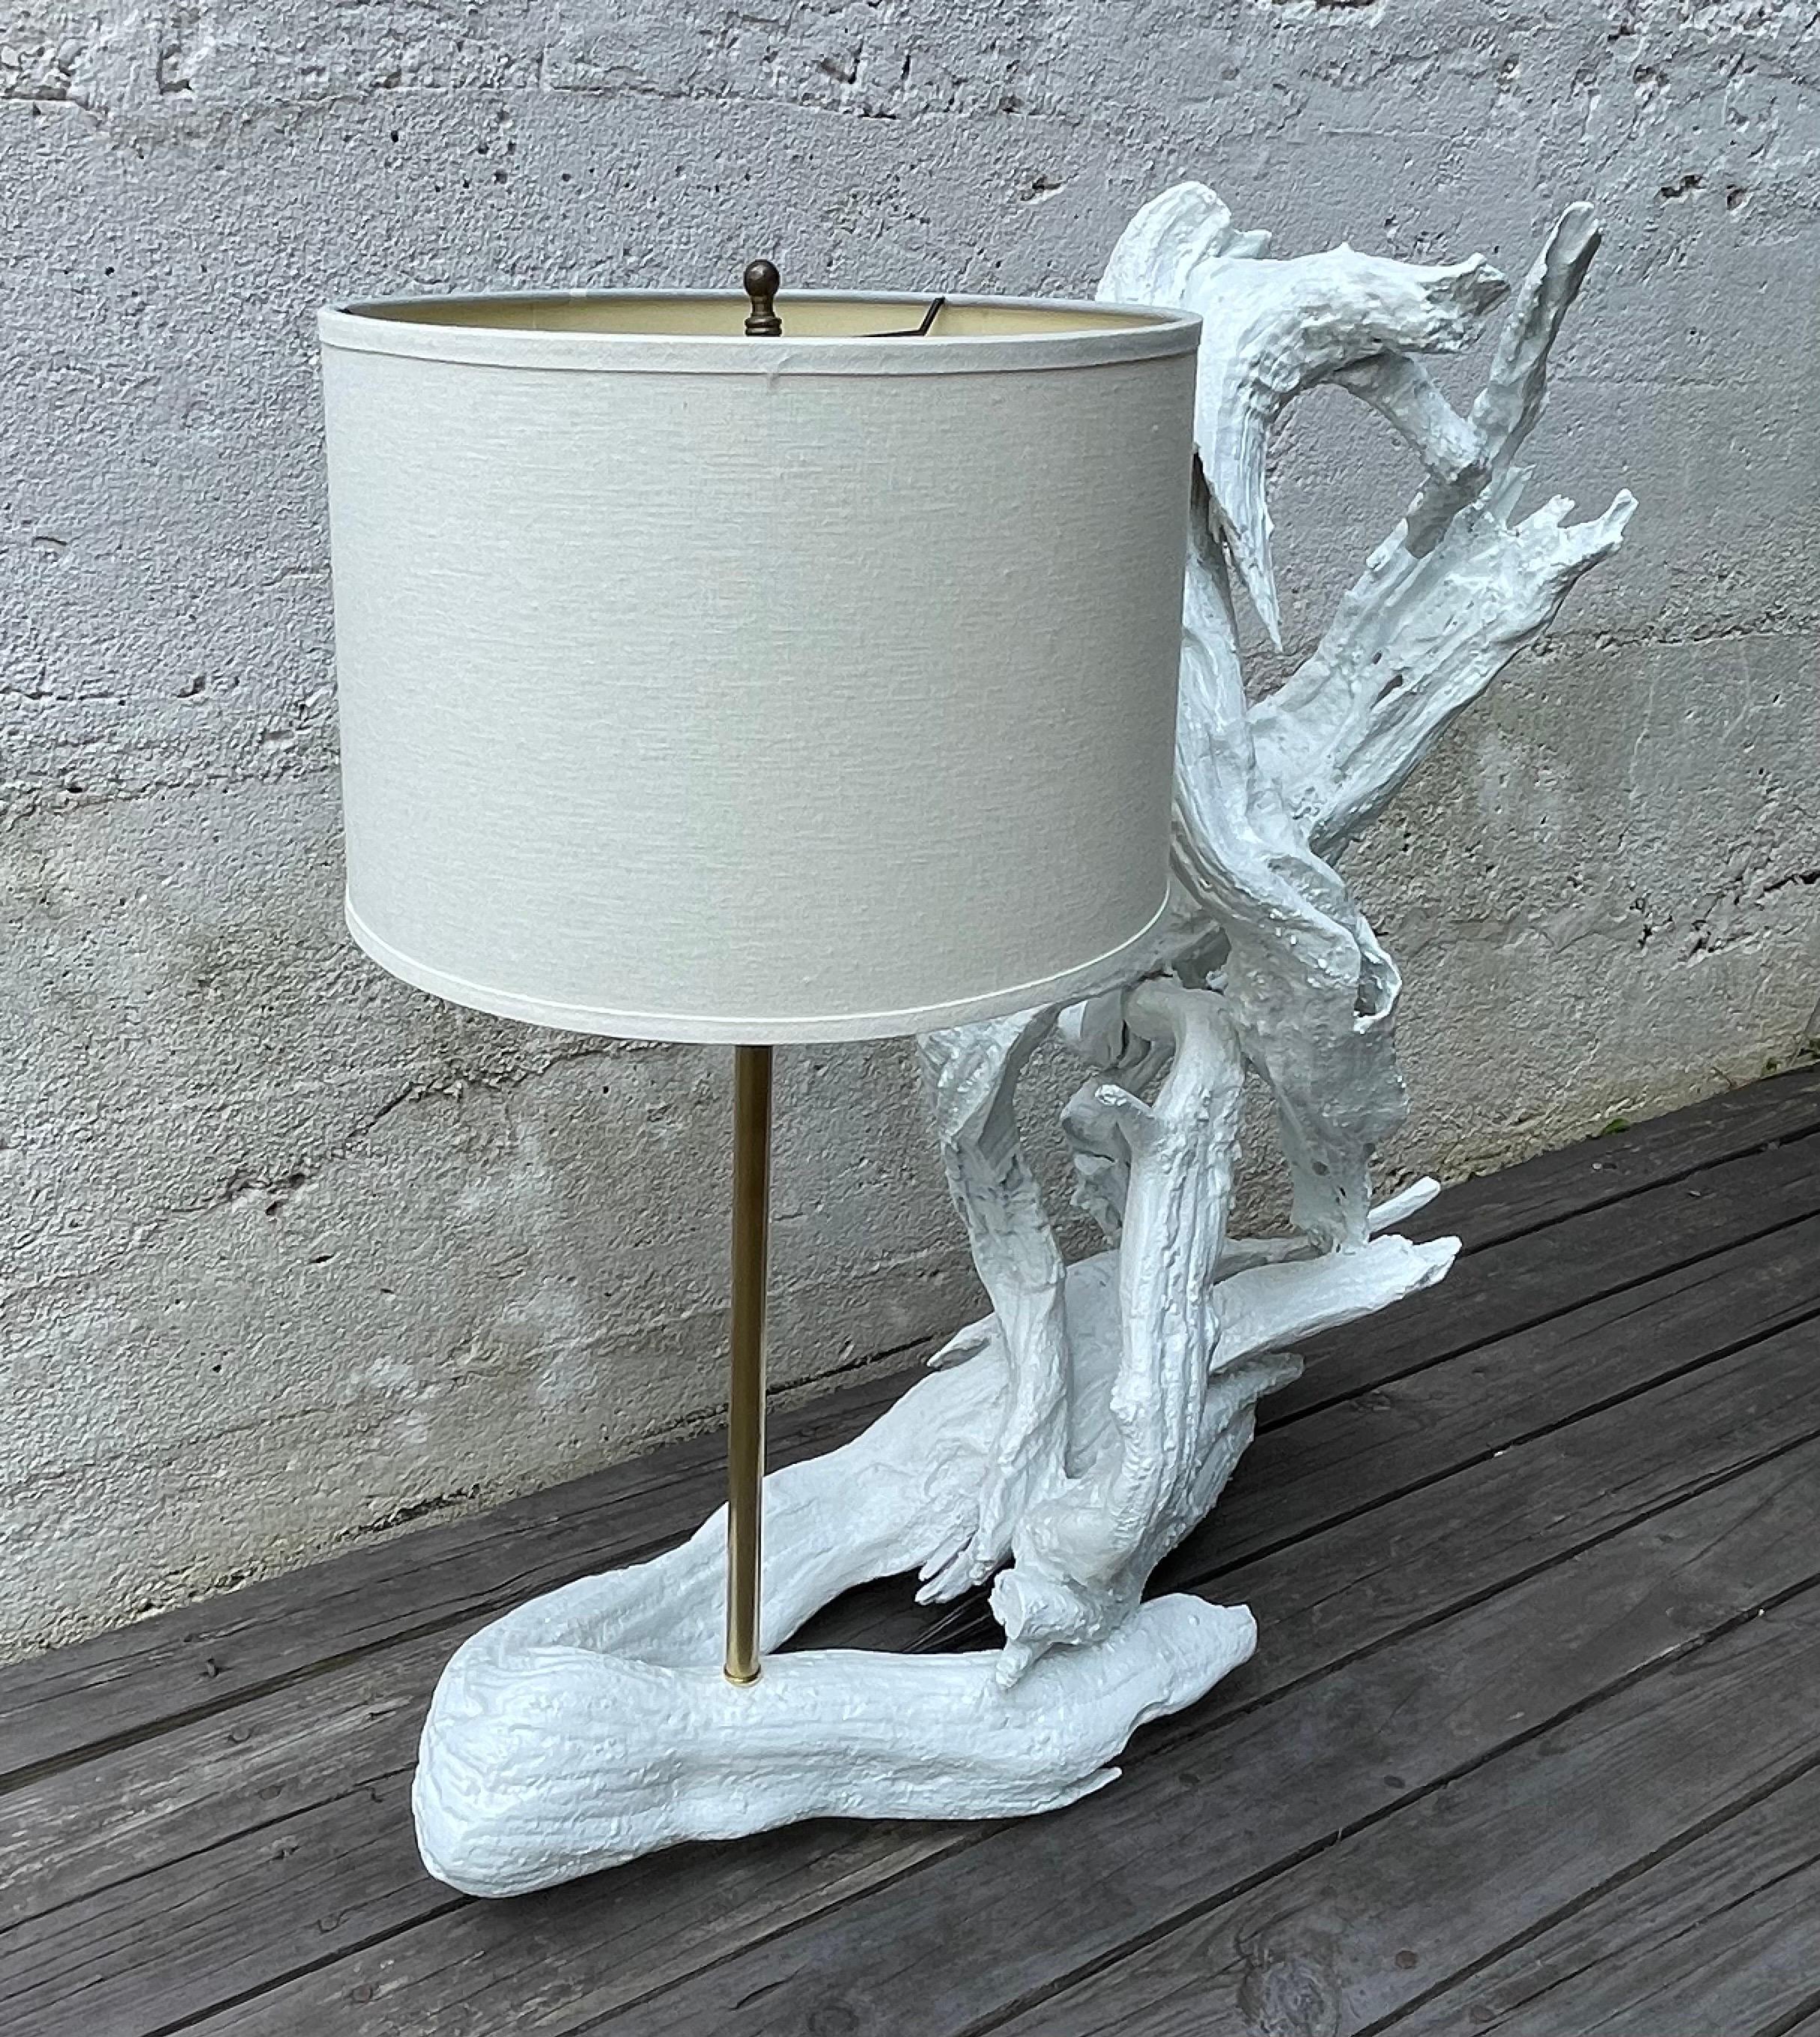 Impressive sculptural driftwood table lamp recently repainted white with new brass hardware, Catskills NY, 1950's

23 inches to the top of the socket, shade and finial not included.